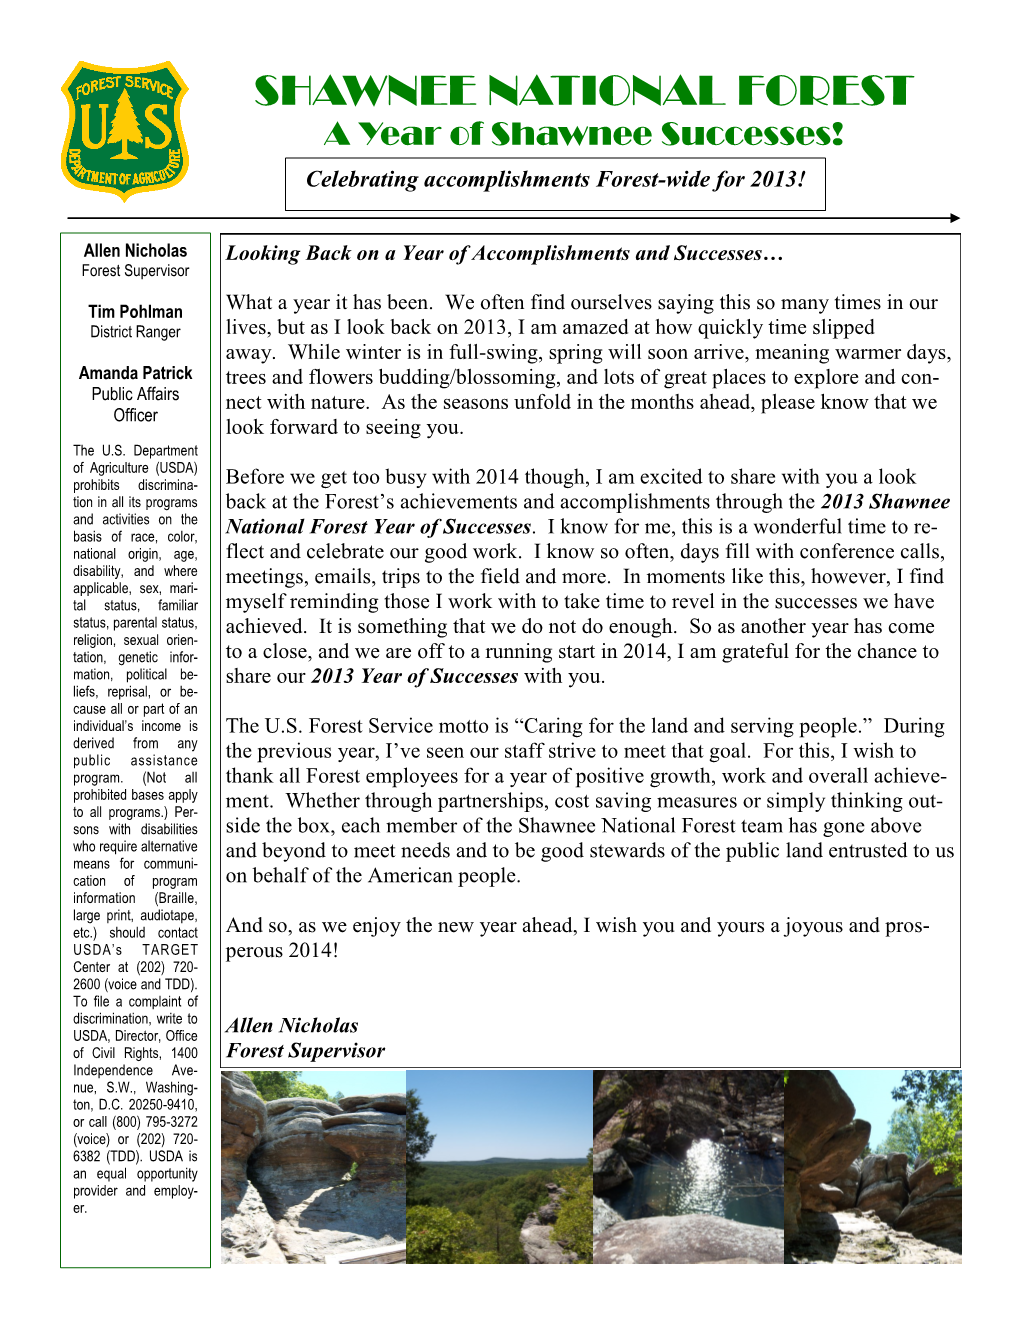 SHAWNEE NATIONAL FOREST a Year of Shawnee Successes! Celebrating Accomplishments Forest-Wide for 2013!